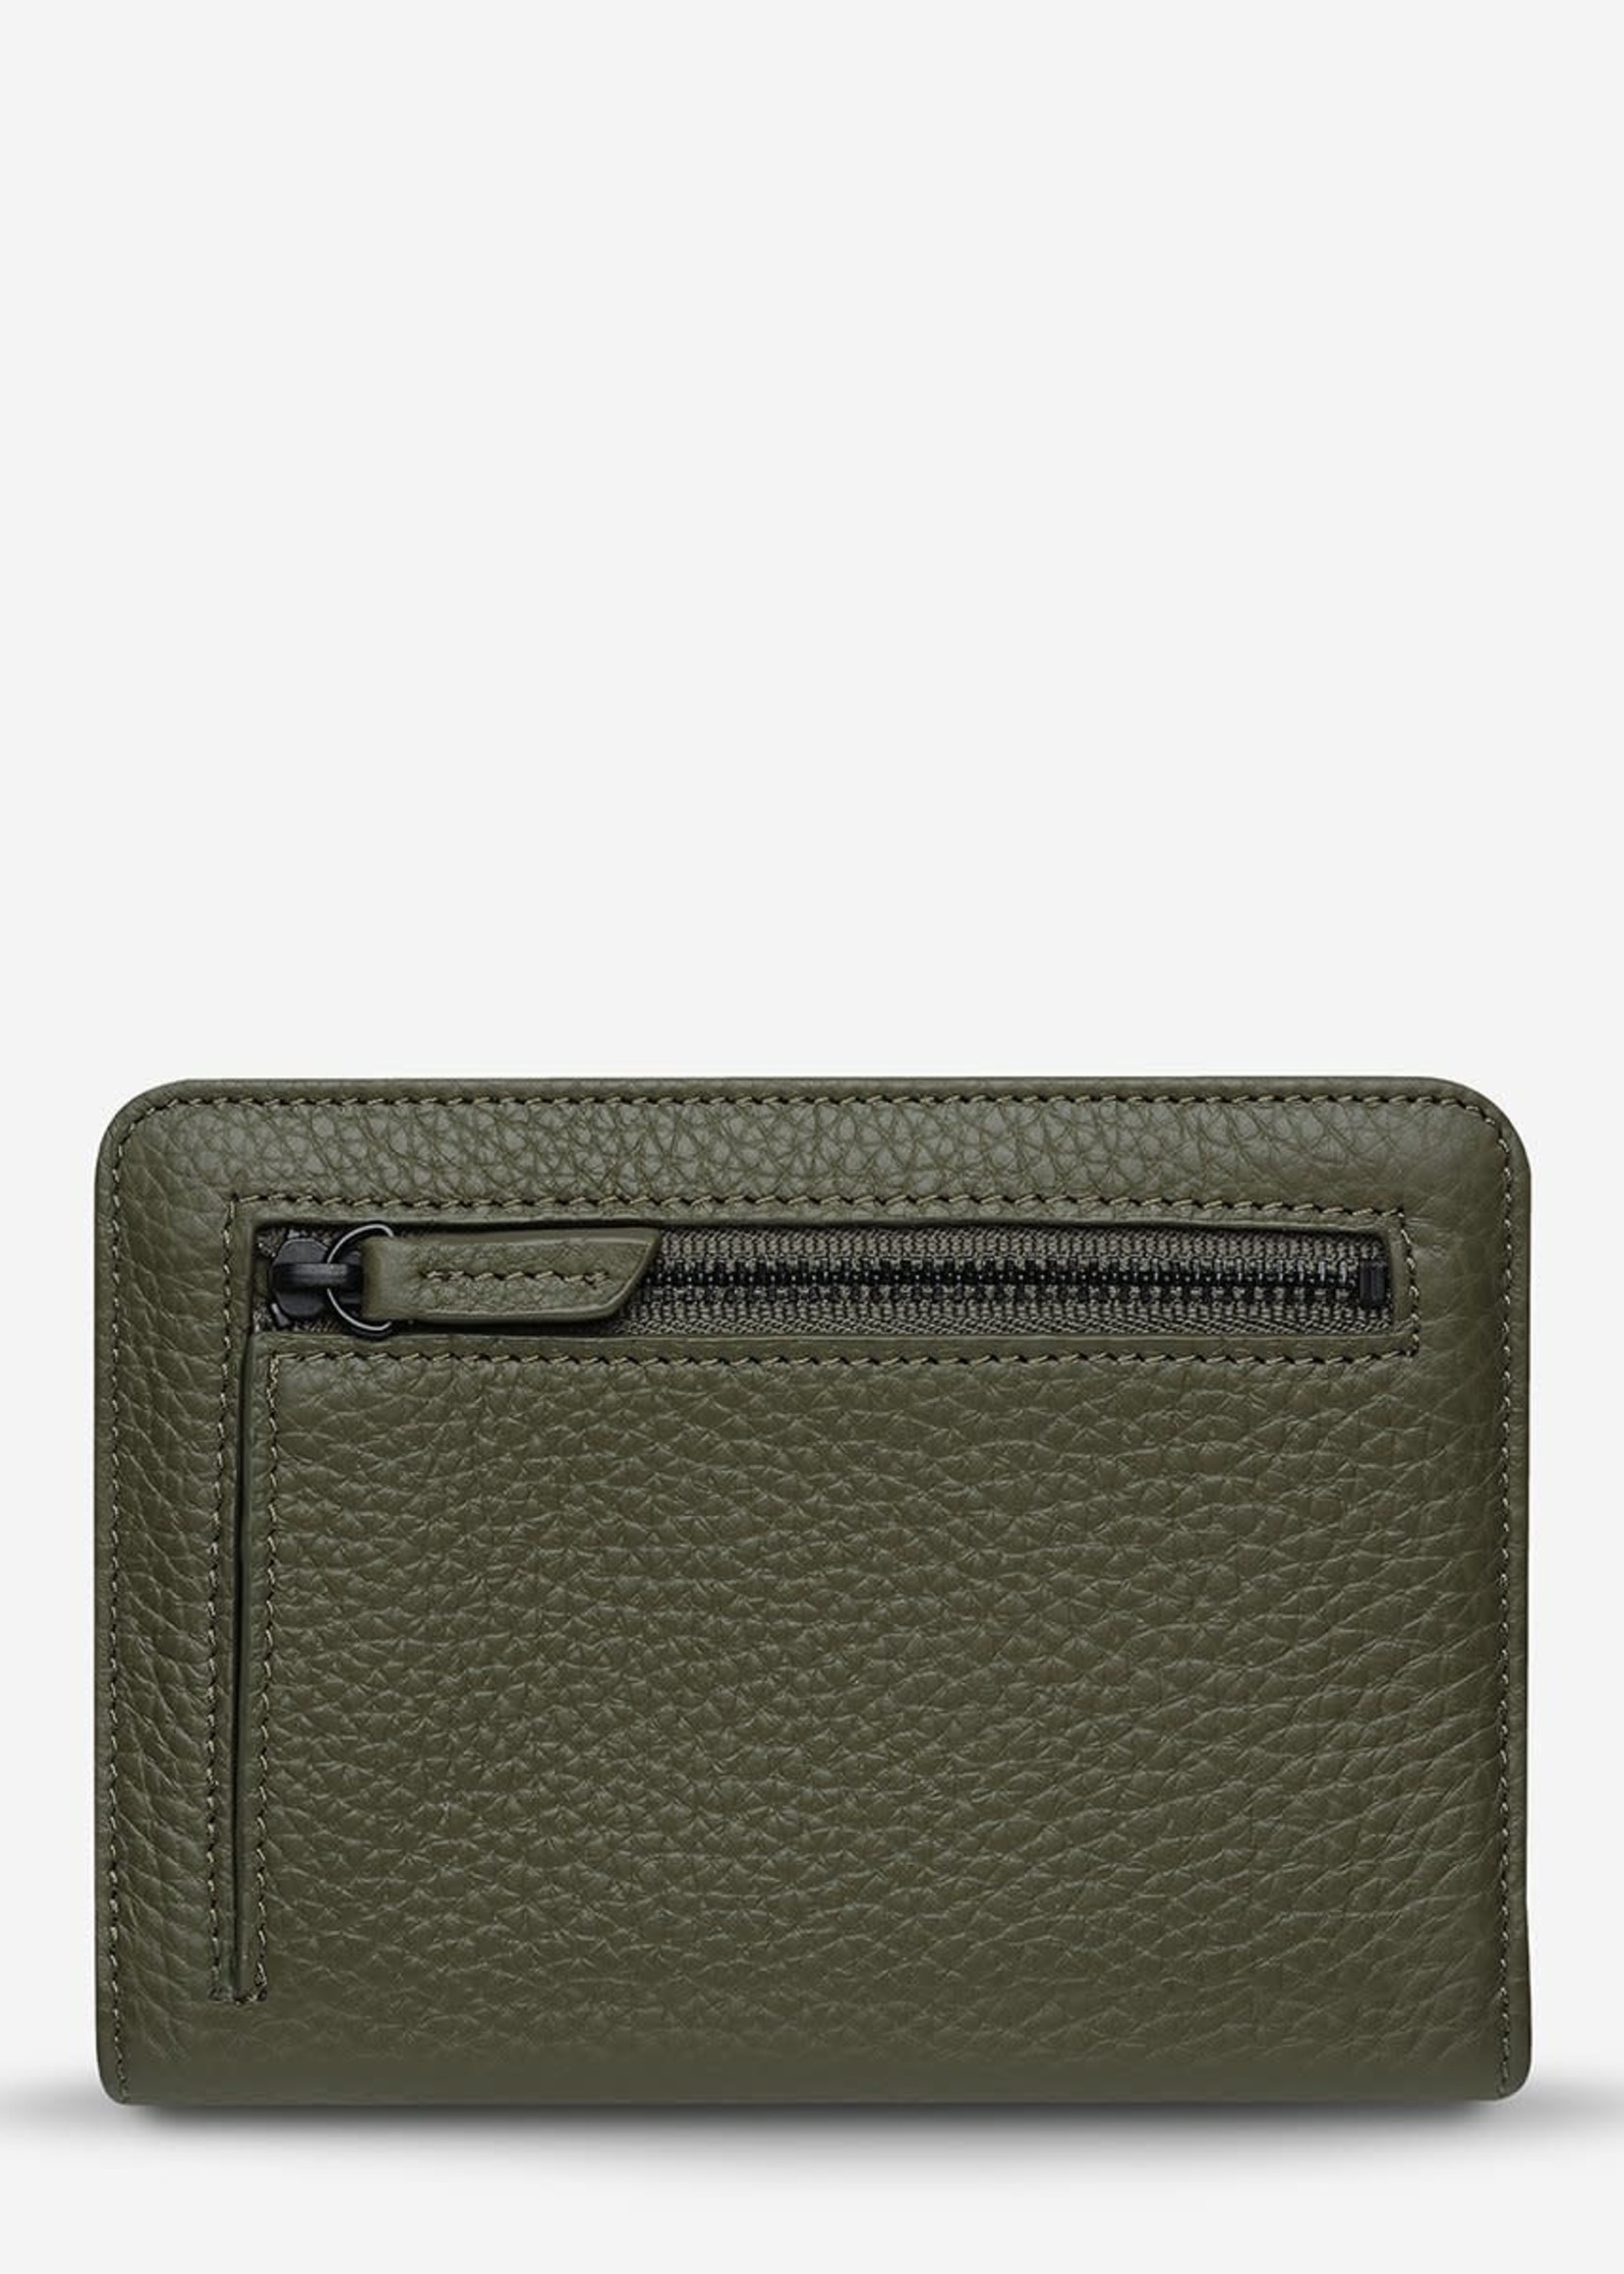 Status Anxiety Popular Problems Wallet